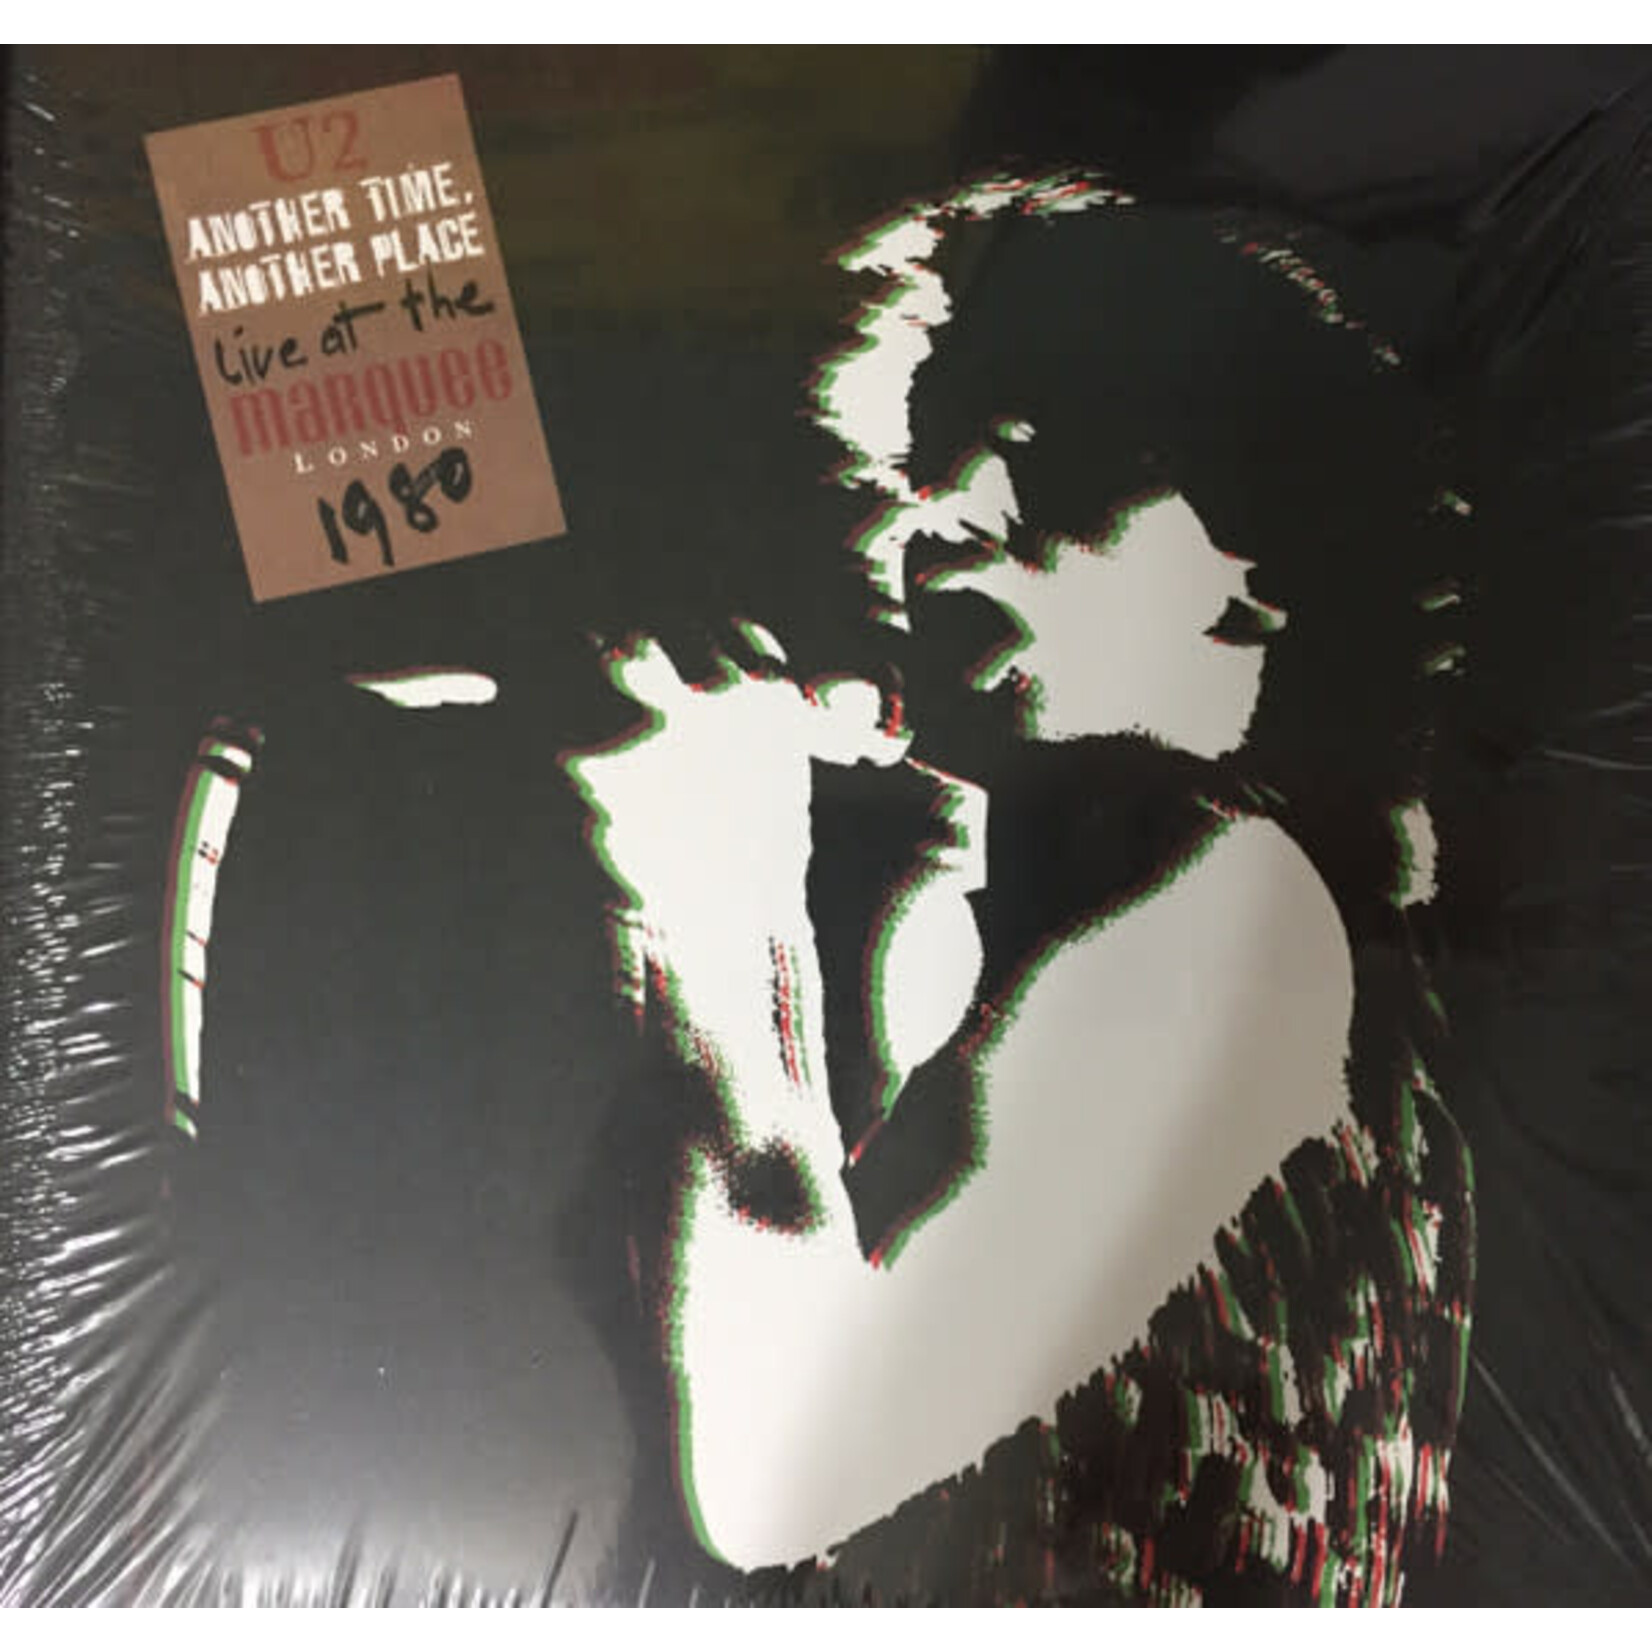 U2 U2 – Another Time, Another Place: Live At The Marquee London 1980 (VG+, 2x 10" Vinyl, U2COMV10, 2015)